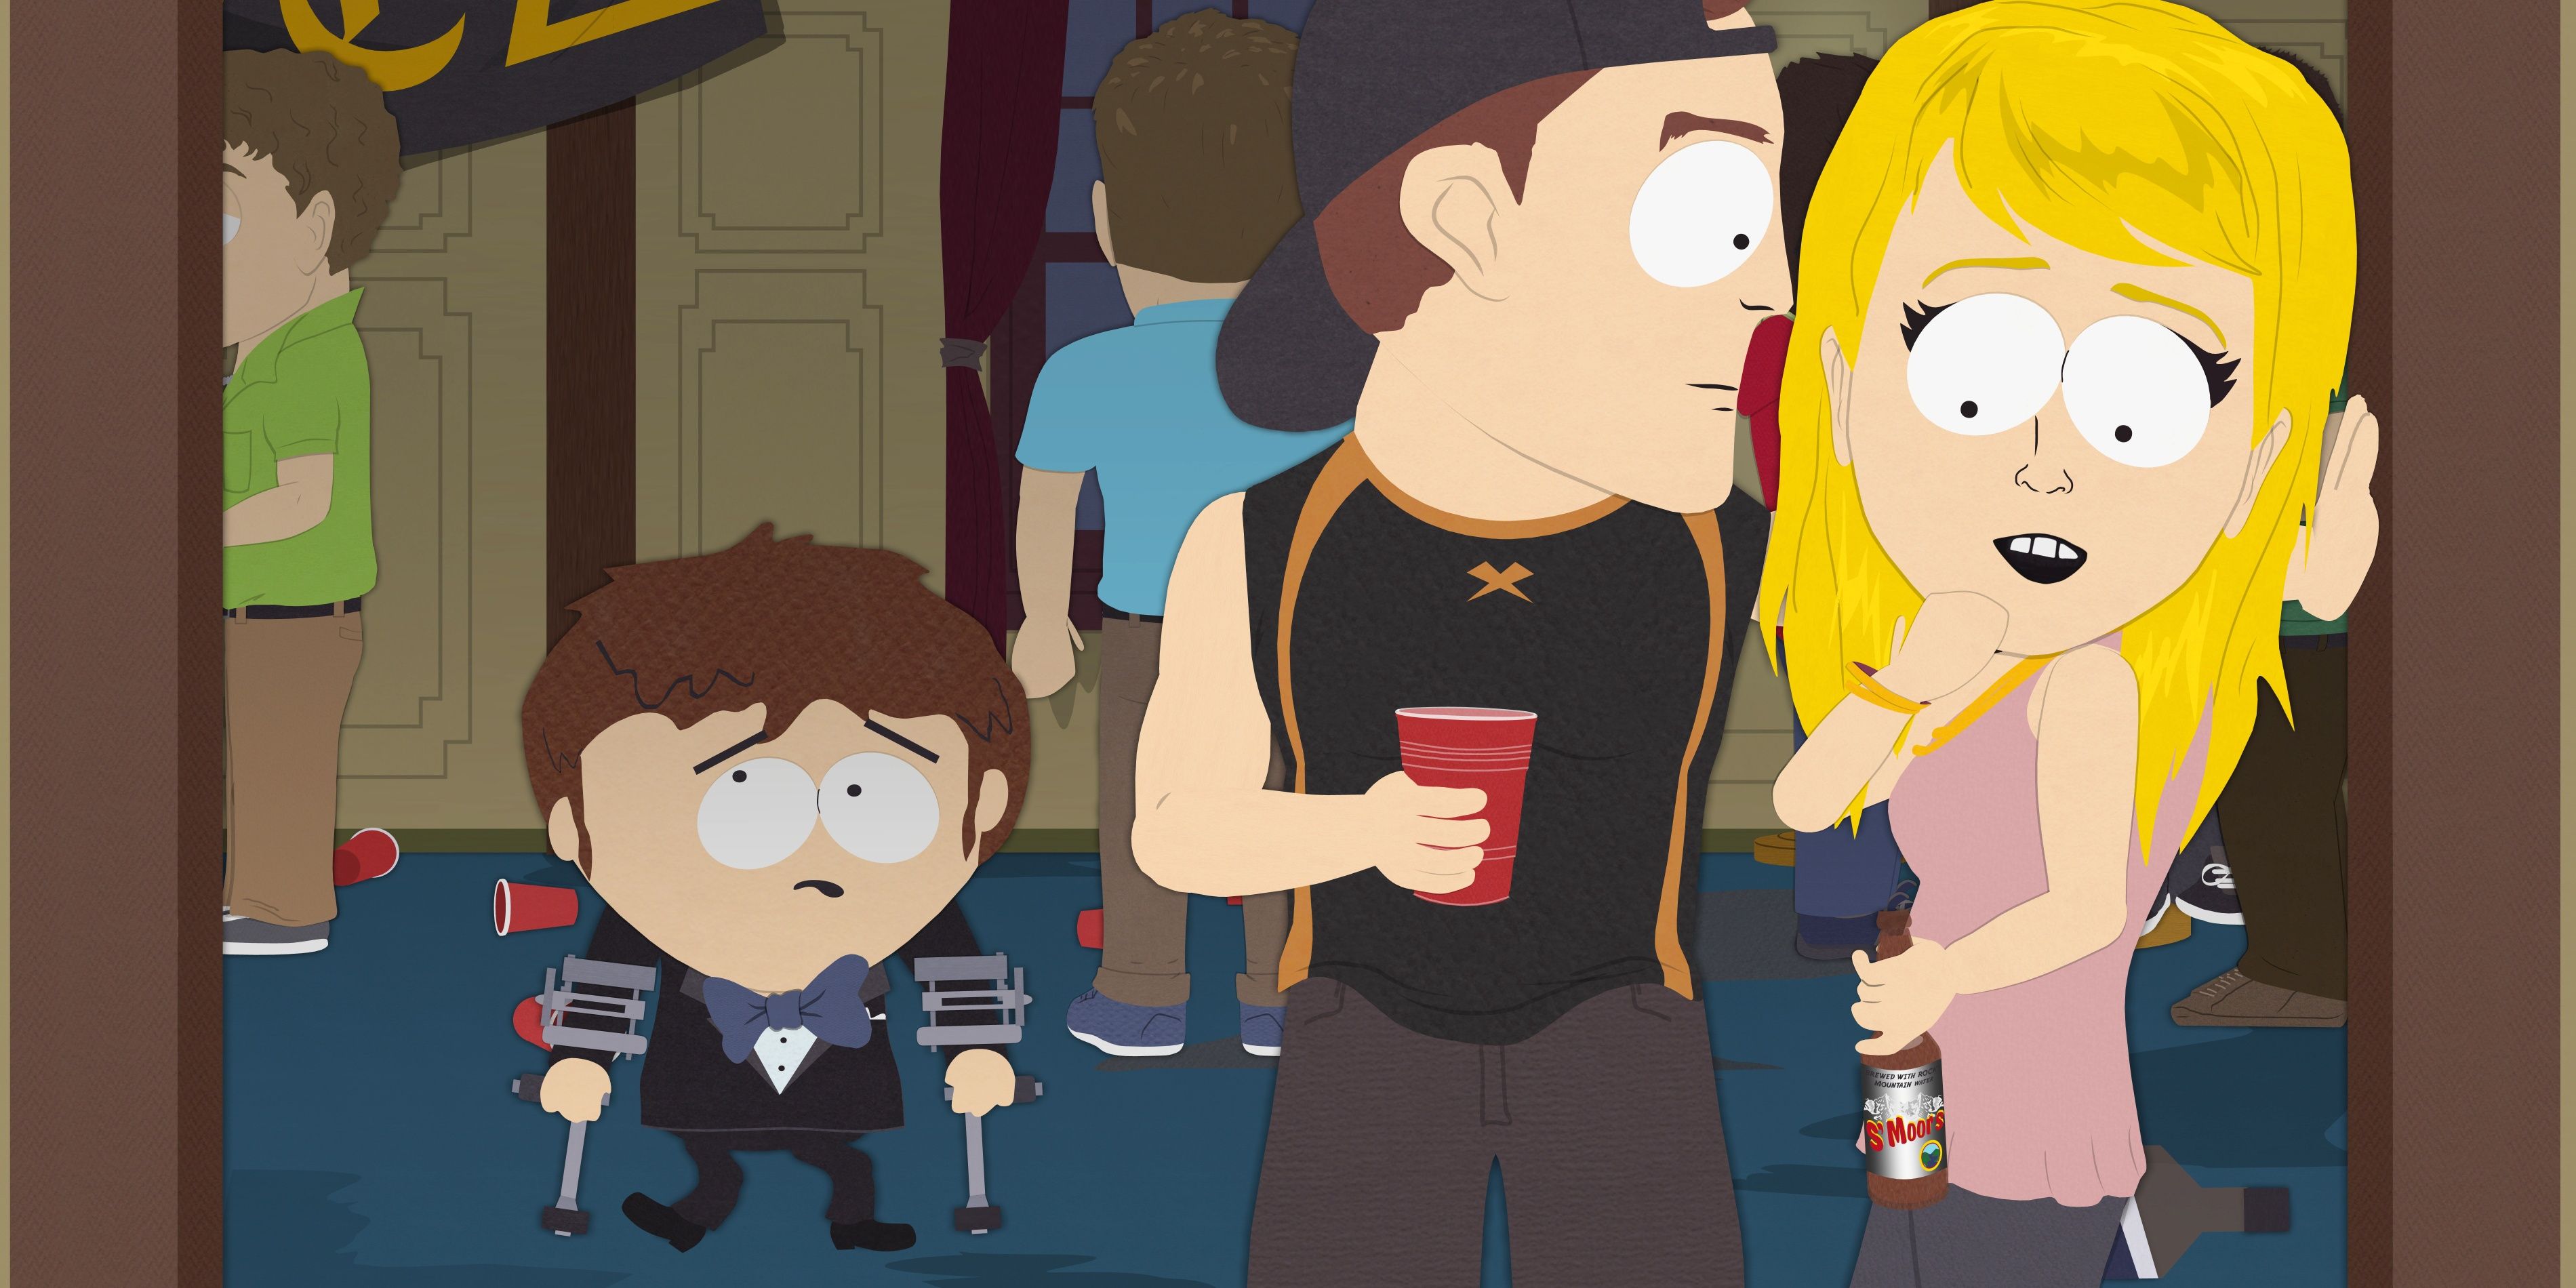 Jimmy looking at two teenagers in South Park.